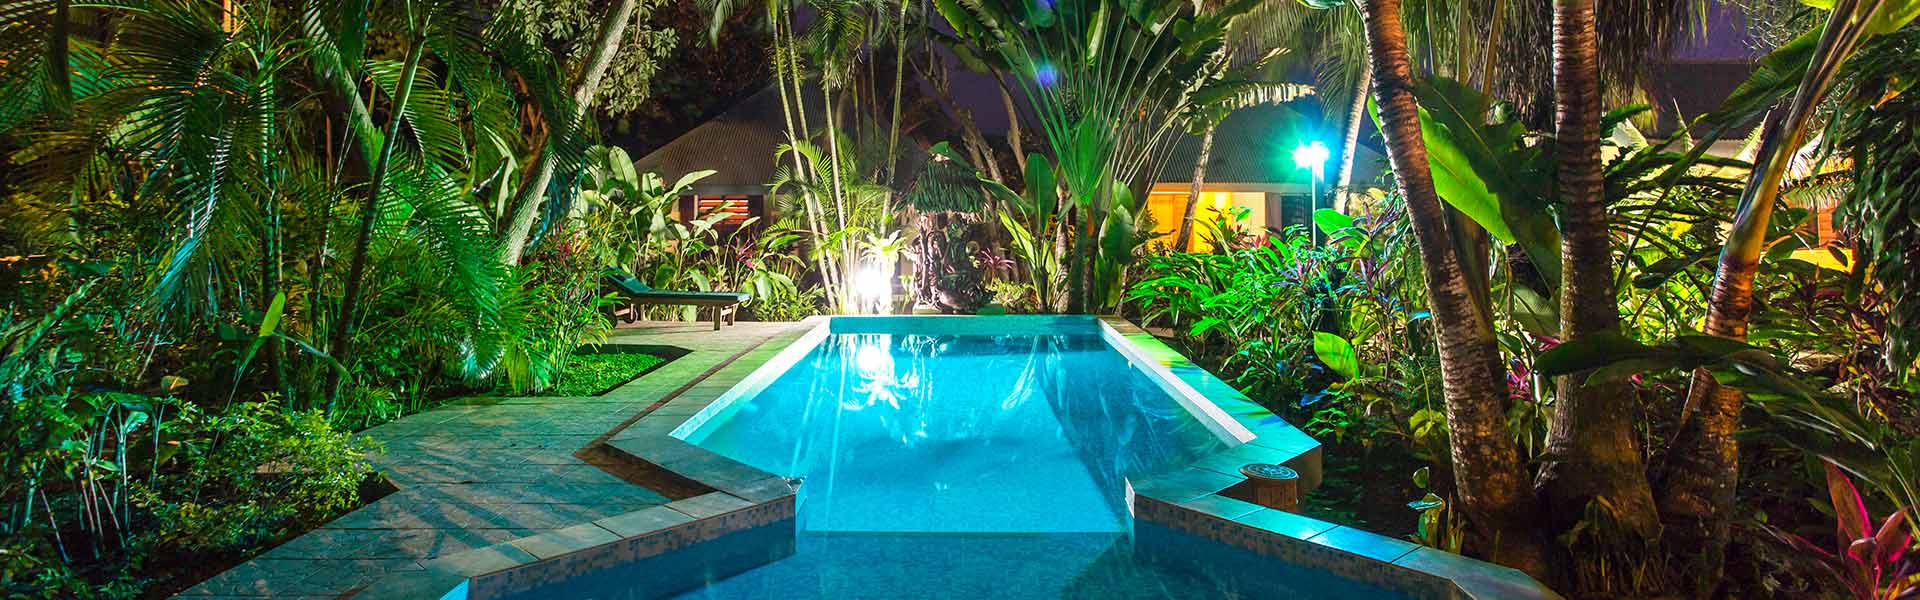 Poppys Tropical Escape Wedding Package w/- Rooms, Transfers & Meals